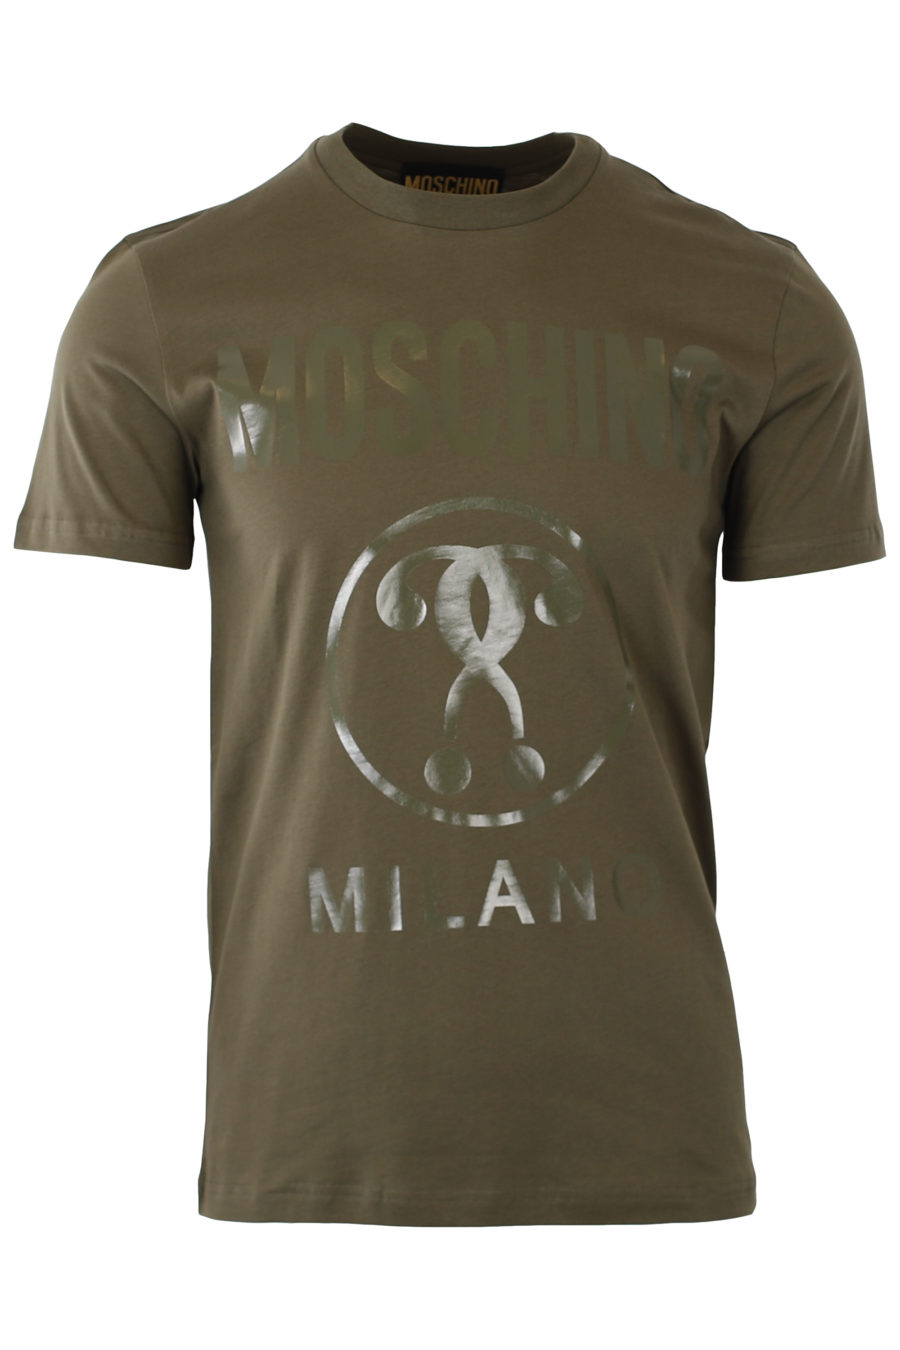 Military green T-shirt with monochrome double question logo - IMG 9319